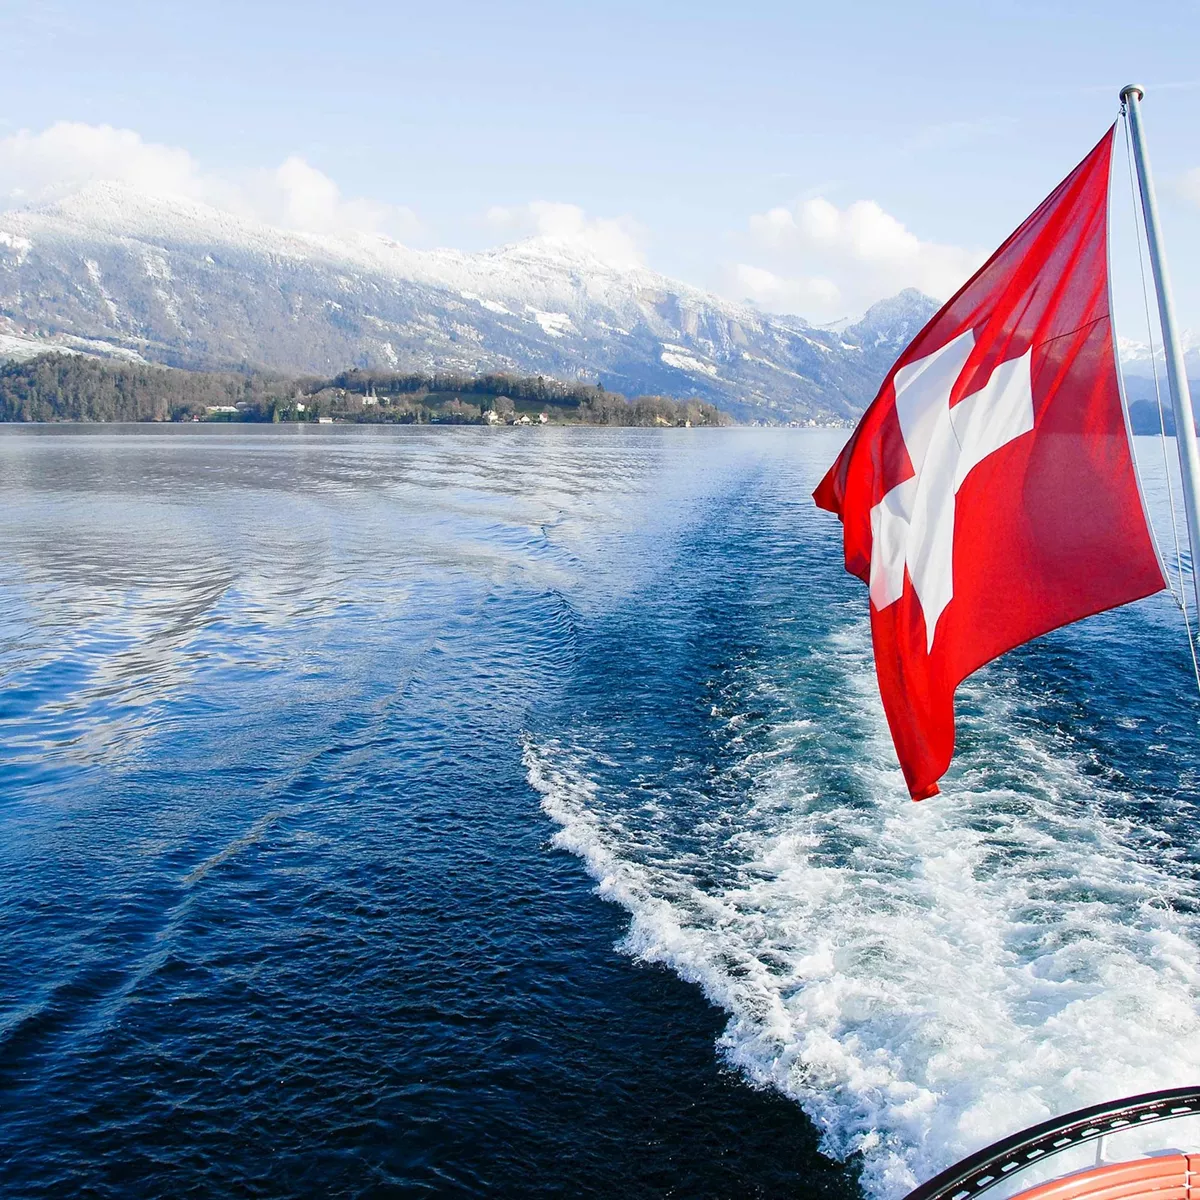 ></center></p><p>9 Days Starting and ending in Zurich</p><p>Visiting: Zürich, Montreux, Zermatt, Lake Maggiore, St. Moritz, Lucerne, Interlaken</p><h2>Tour operator:</h2><p>Guide type:.</p><p>Fully Guided</p><h2>Group size:</h2><p>Trip styles:.</p><p>Coach tours (worldwide)</p><p>Cultural , Gardens & Nature Tours , History , Rail Tours</p><h2>Activities:</h2><p>Sightseeing</p><p>NB: Prices correct on 02-Jun-2024 but subject to change.</p><h2>This tour is no longer available, please see similar tours below or send an enquiry</h2><p>Tour overview.</p><p>Embark on the 